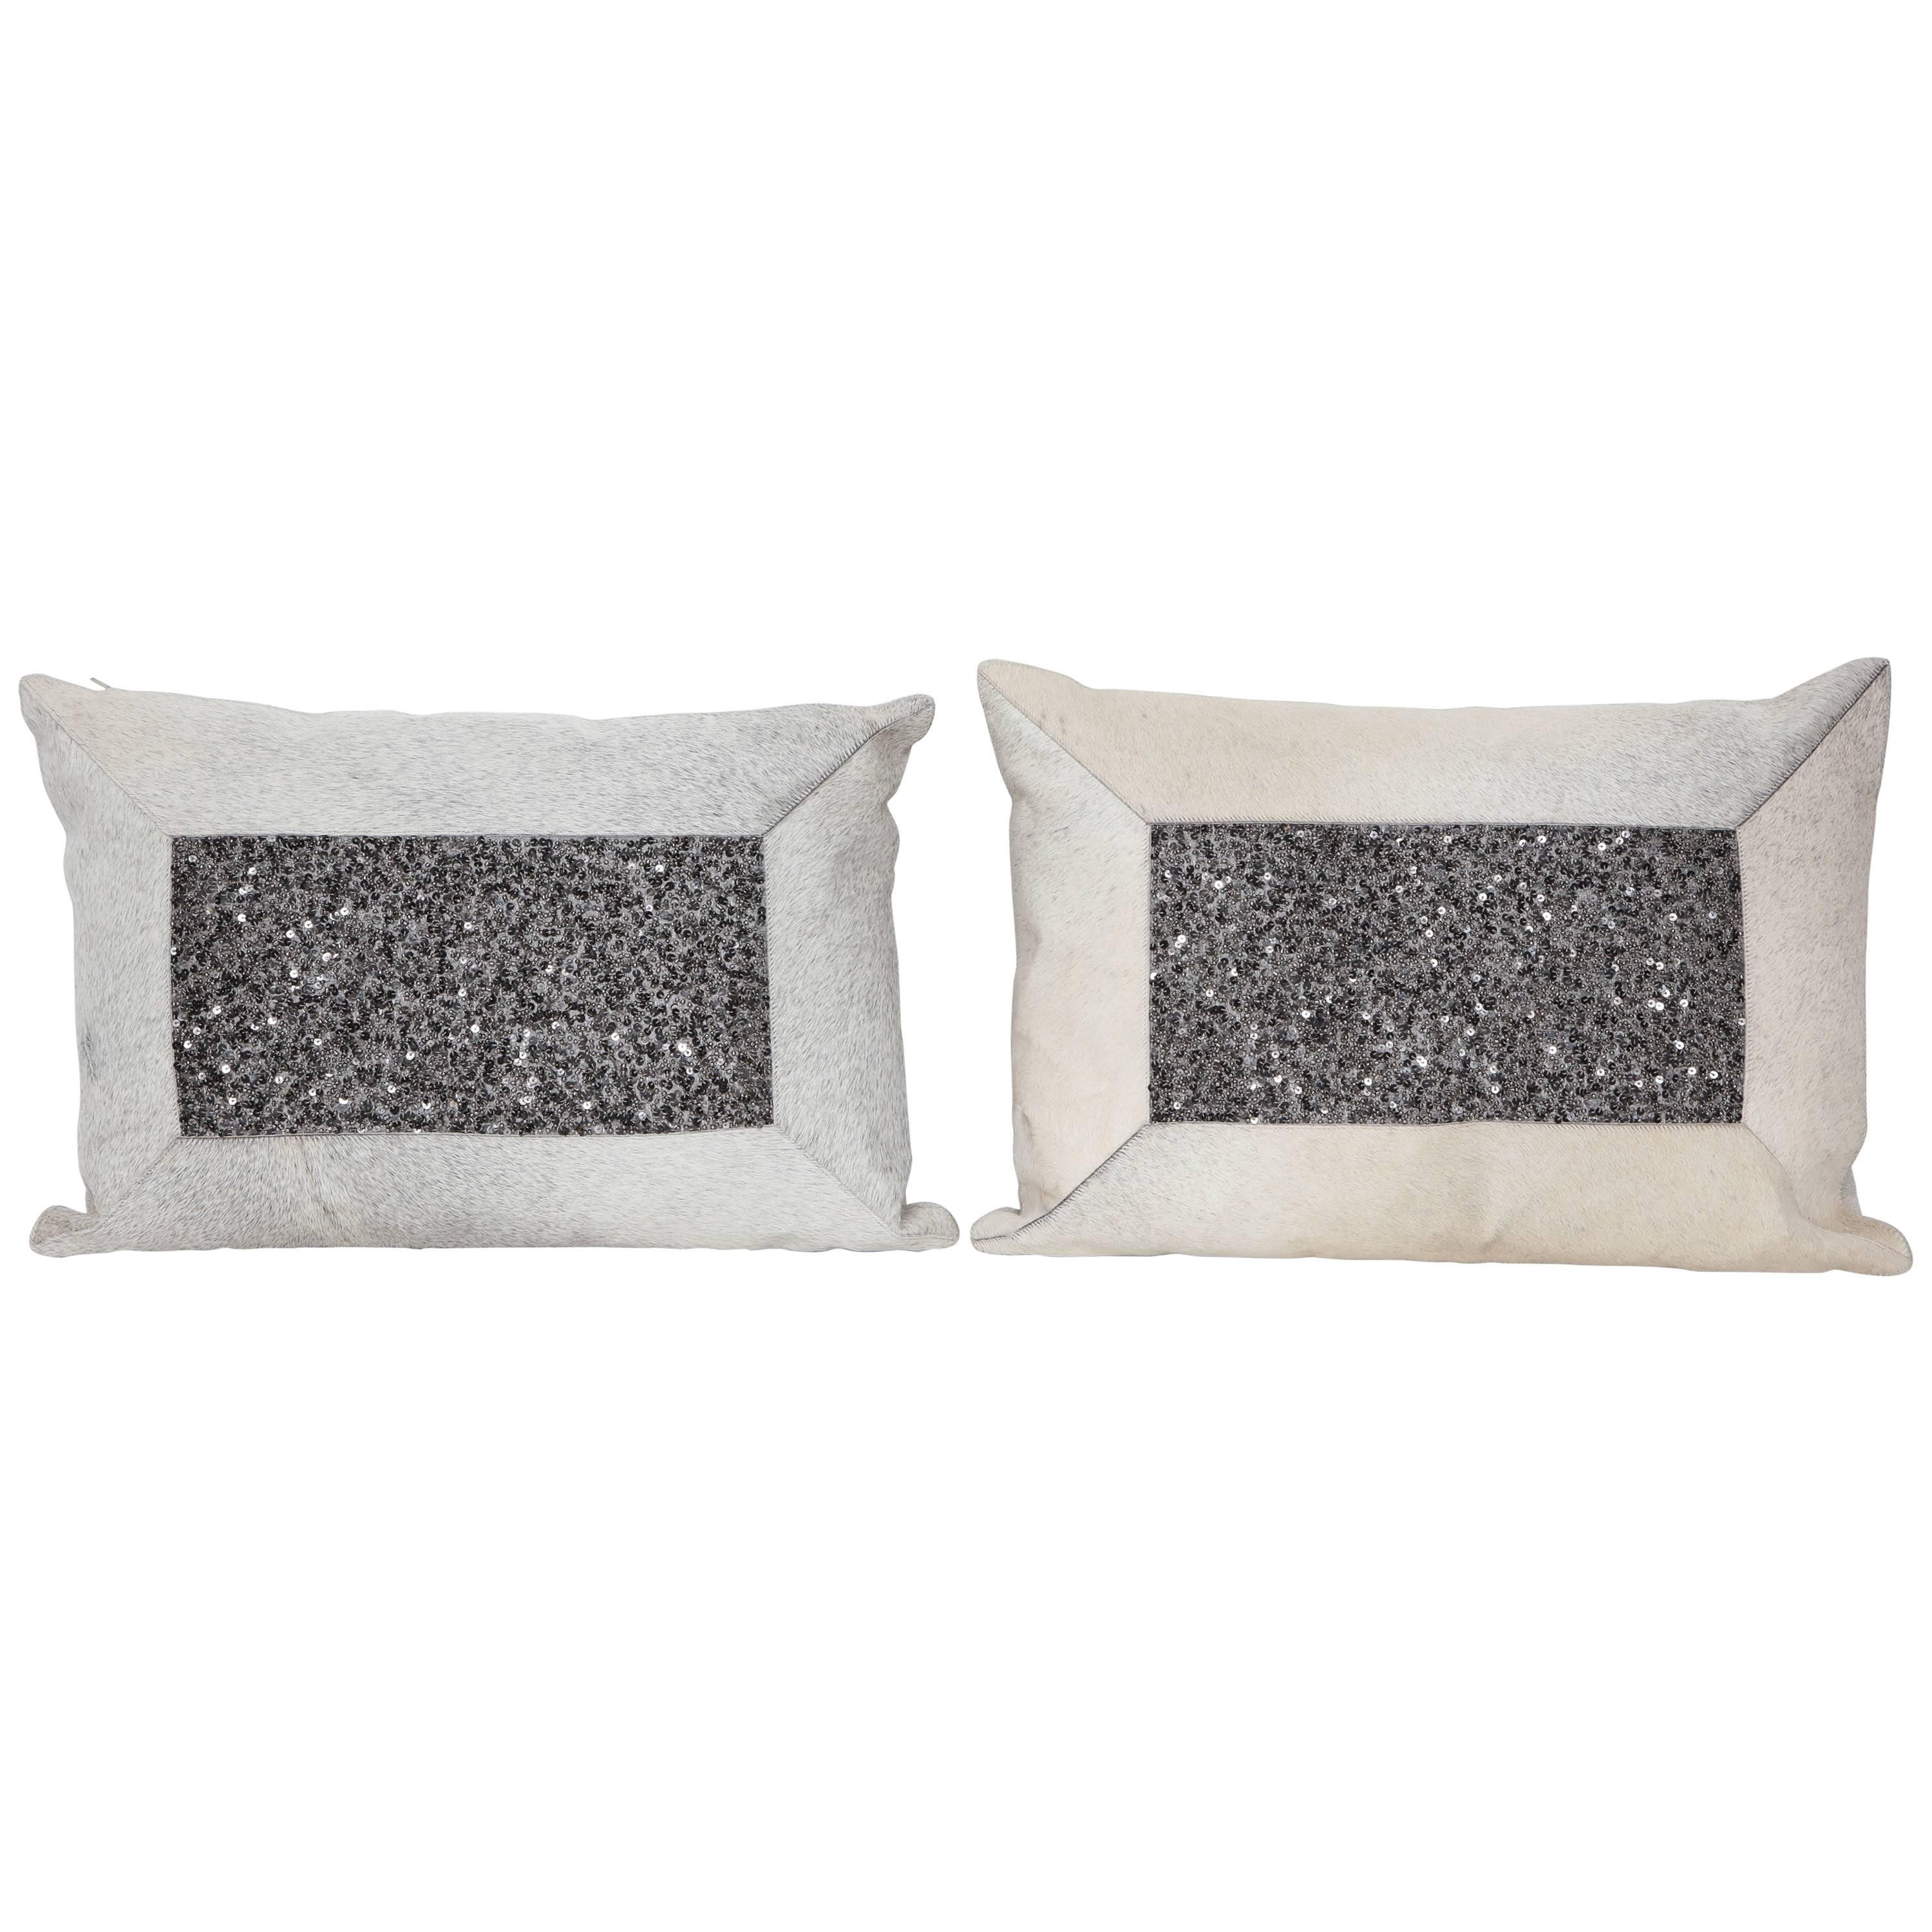 Pair of White Brindle Hide and Bead Pillows